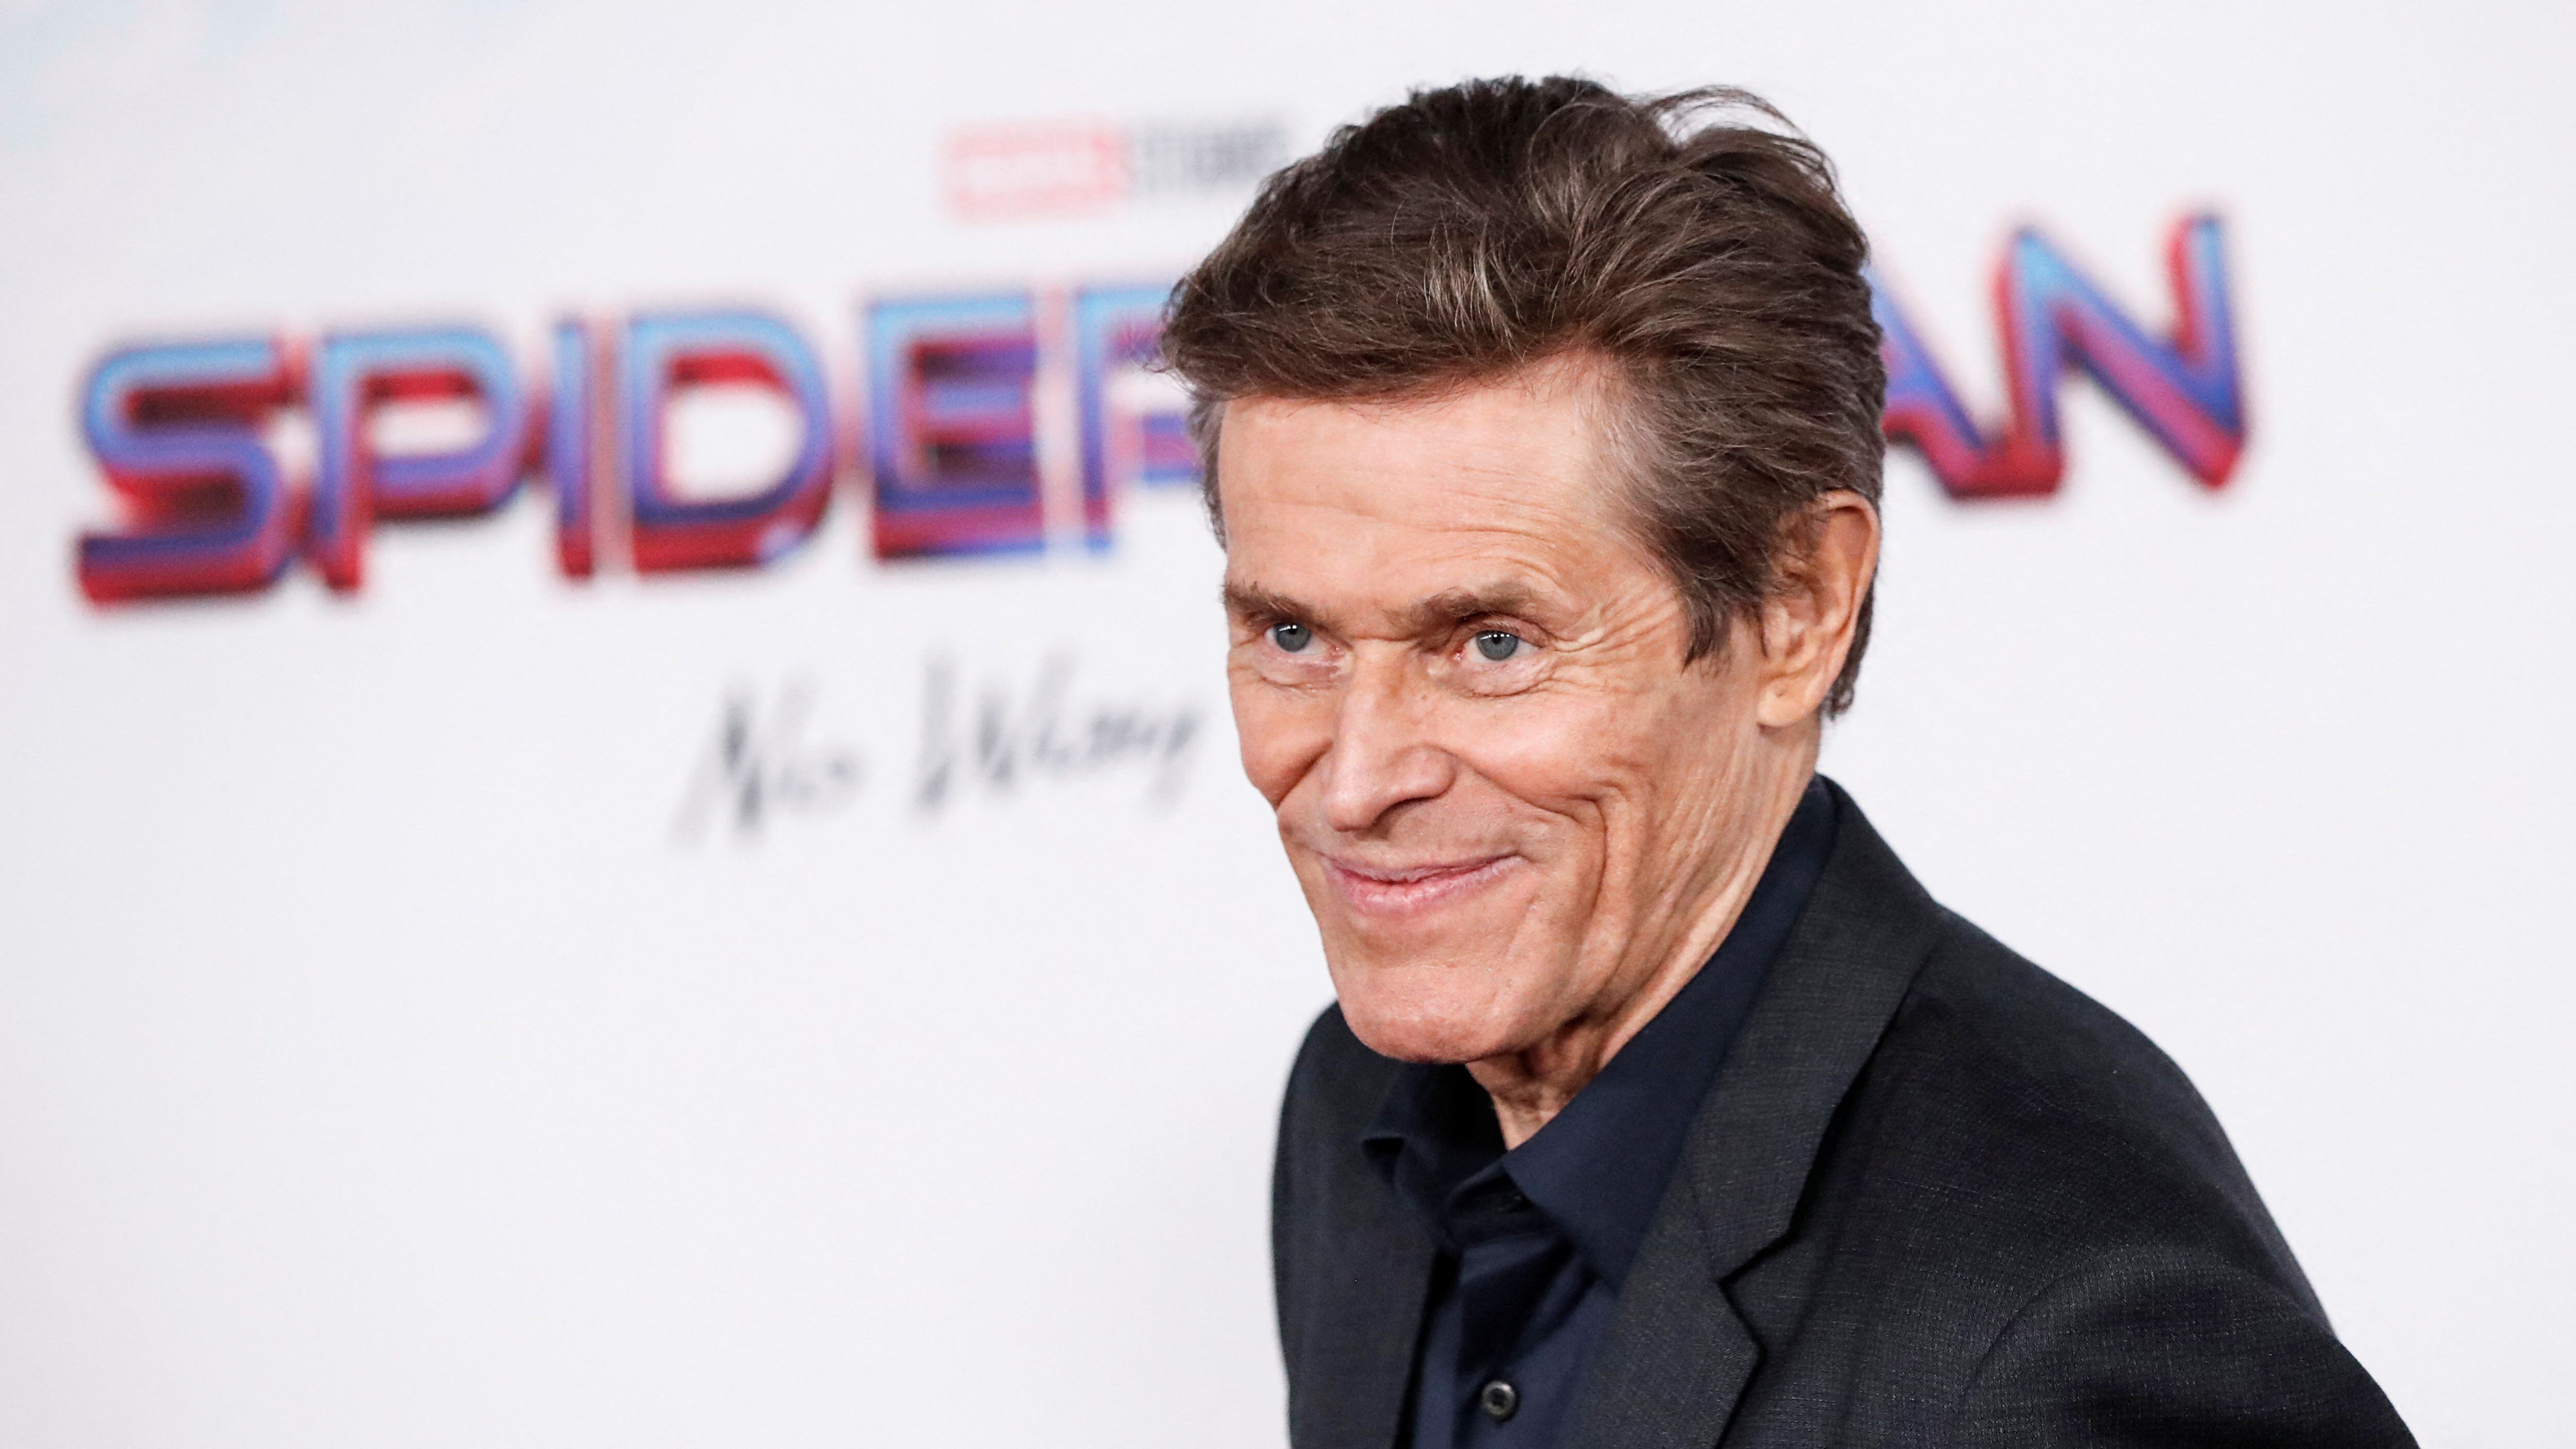 “Spider-man: No way home”: Willem Dafoe revealed what were his conditions to play the “Green Goblin”